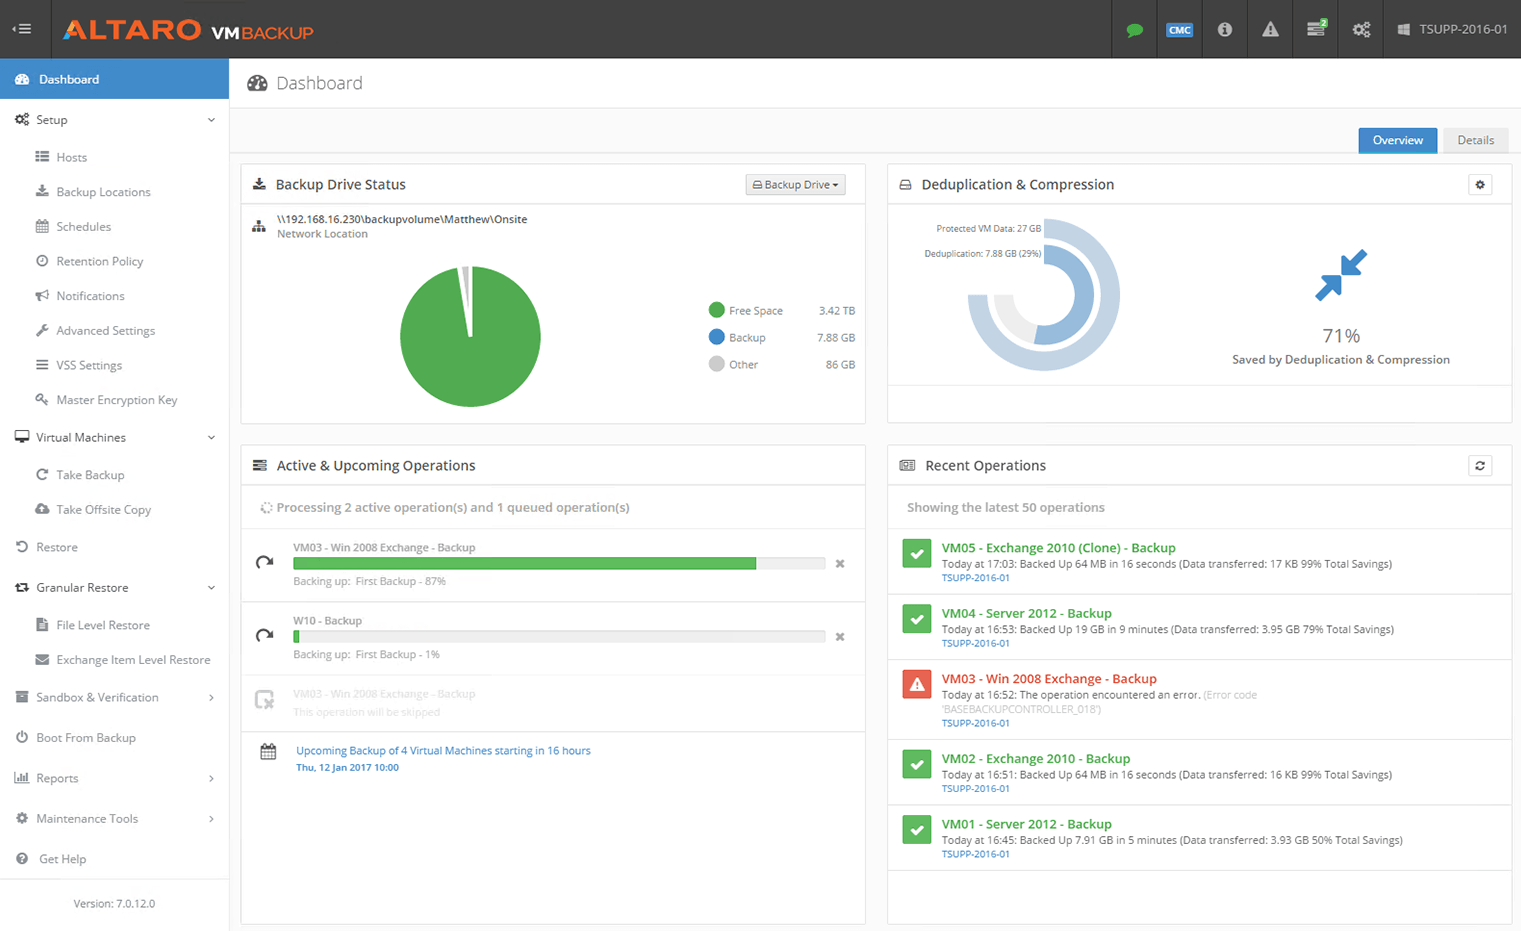 Monitor the status of your backup jobs from the dashboard